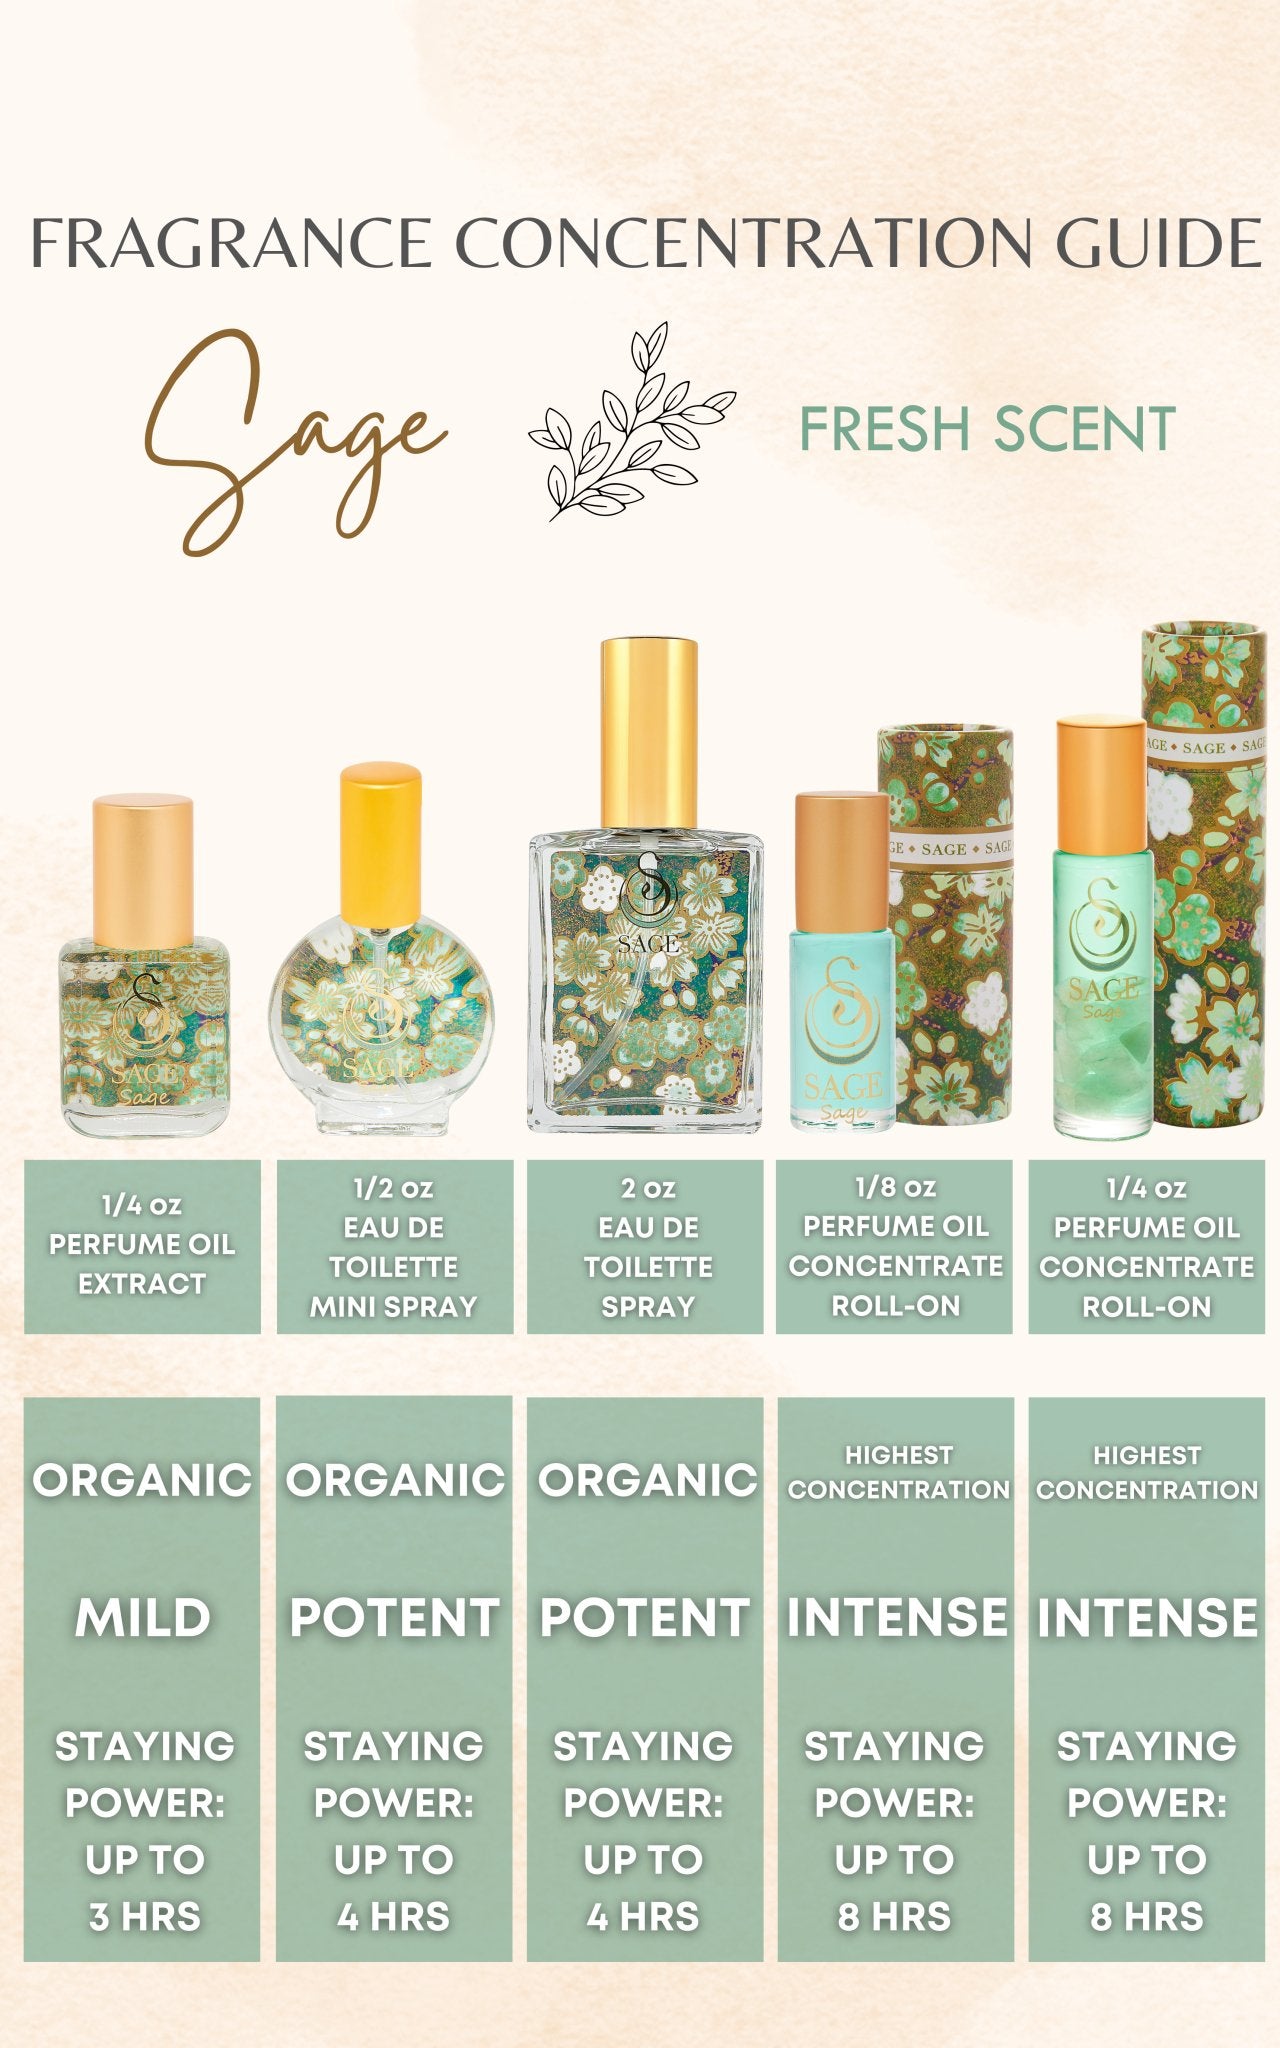 Sage 1/4 oz Gemstone Perfume Oil Concentrate Roll-On by Sage - The Sage Lifestyle